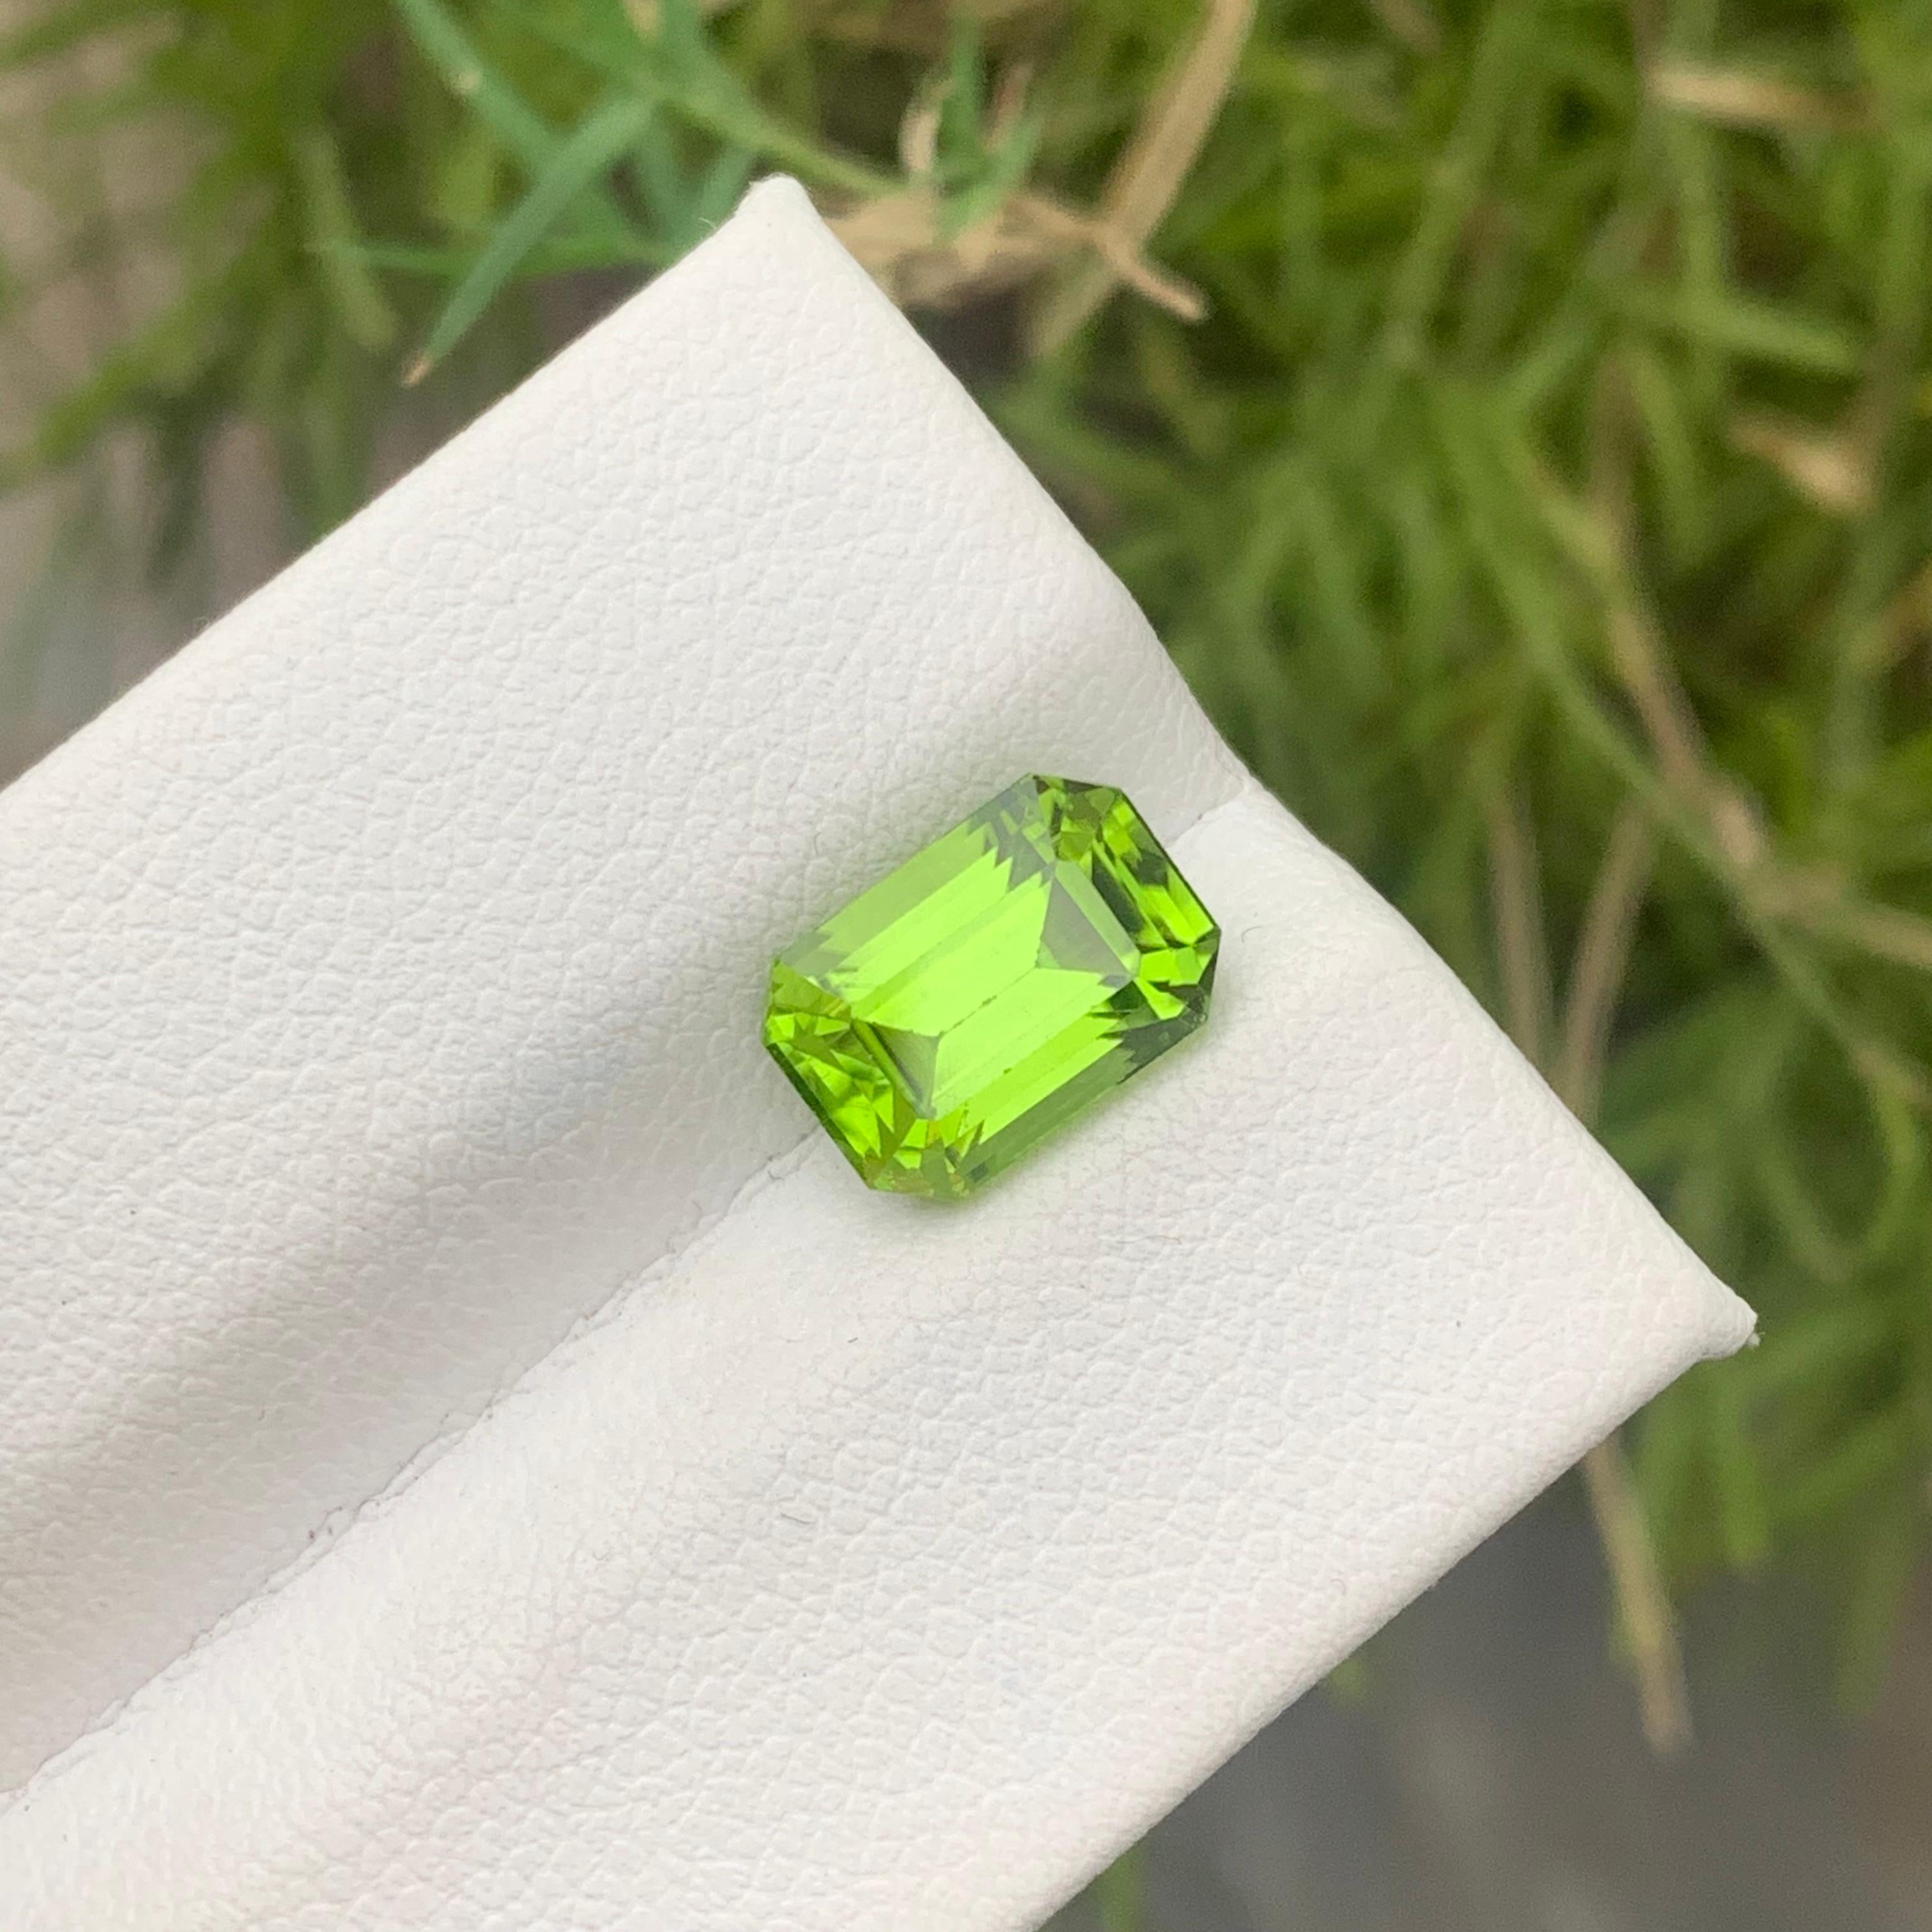 Women's or Men's Gorgeous 3.35 Carat Natural Loose Green Peridot Gemstone from Pakistani Mine For Sale